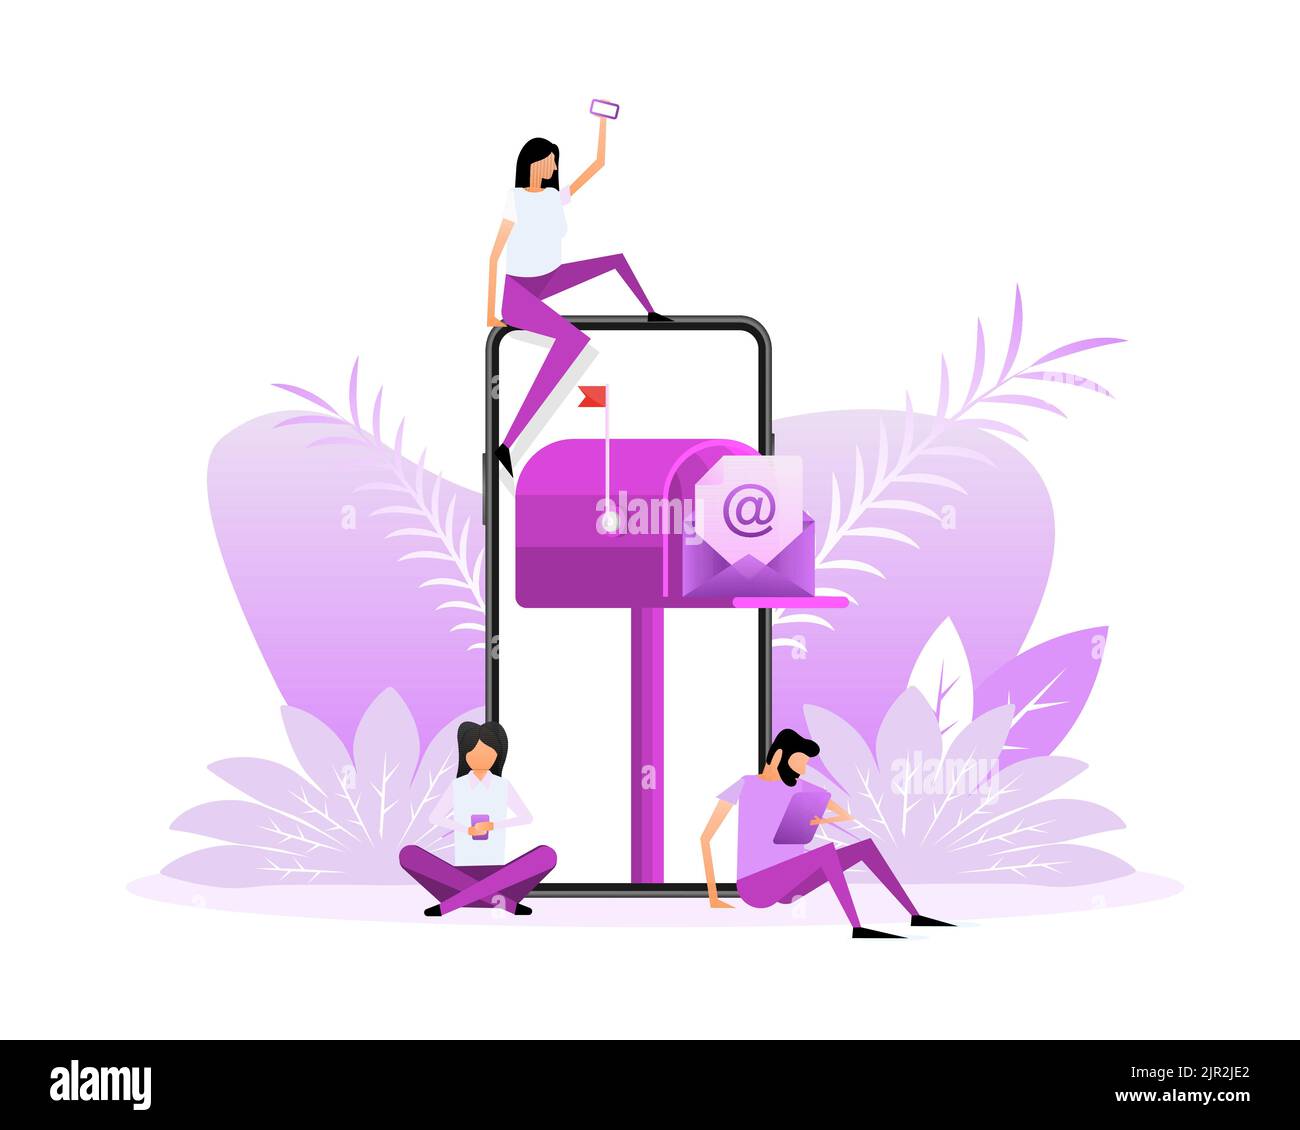 Mailbox with a letter inside in a flat style on a white background with people. Vector illustration Stock Vector